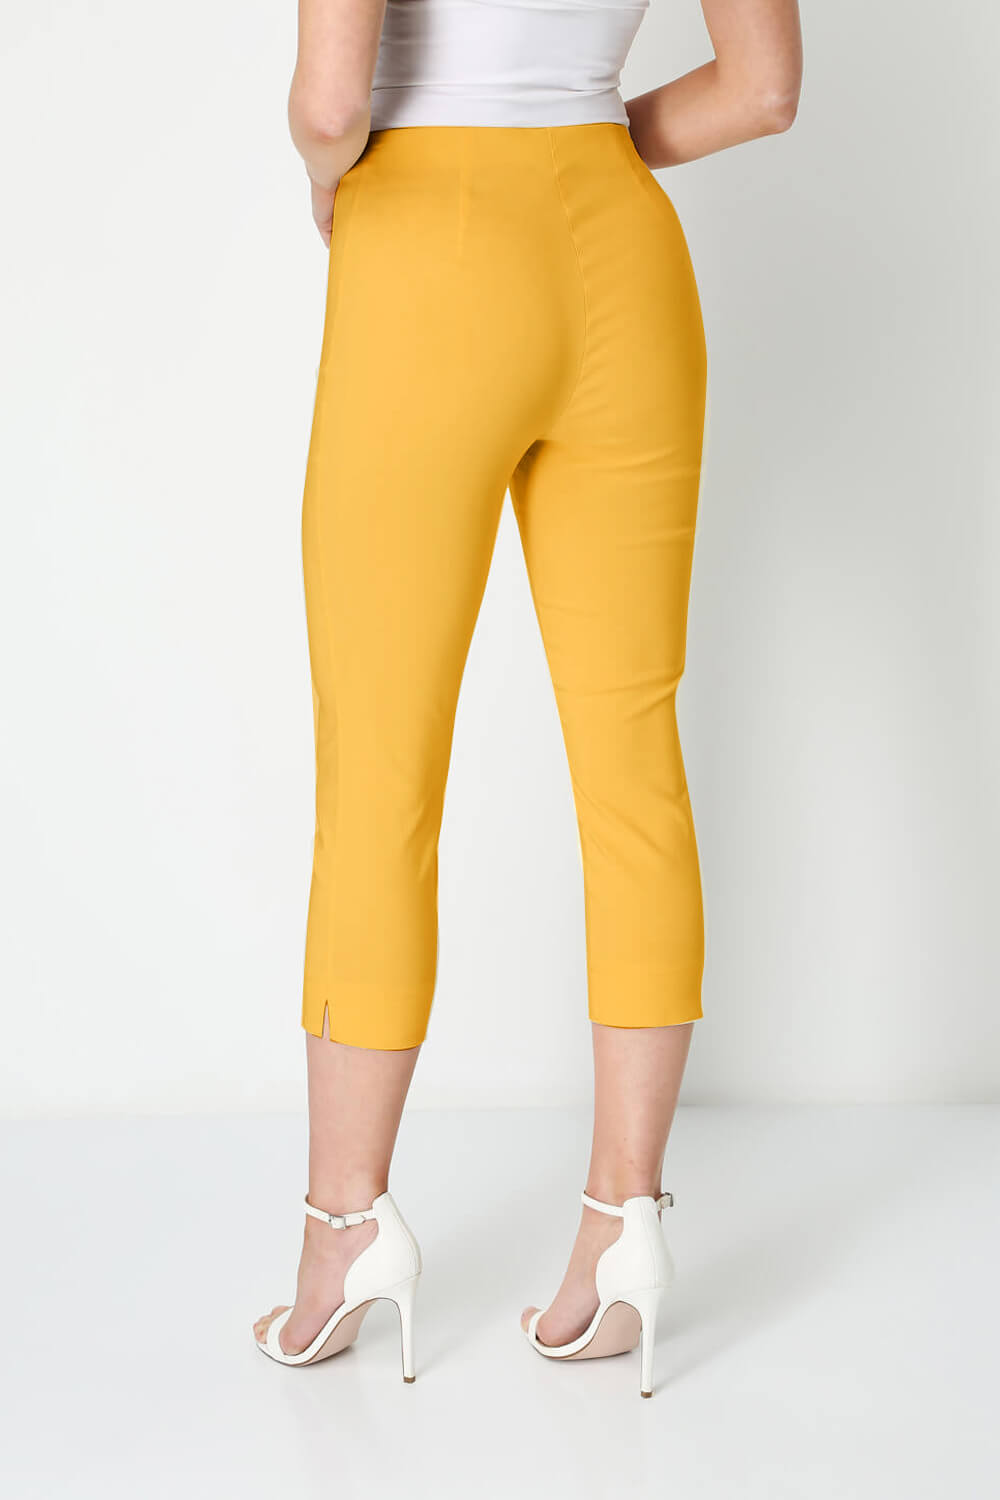 Yellow Cropped Stretch Trouser, Image 2 of 5